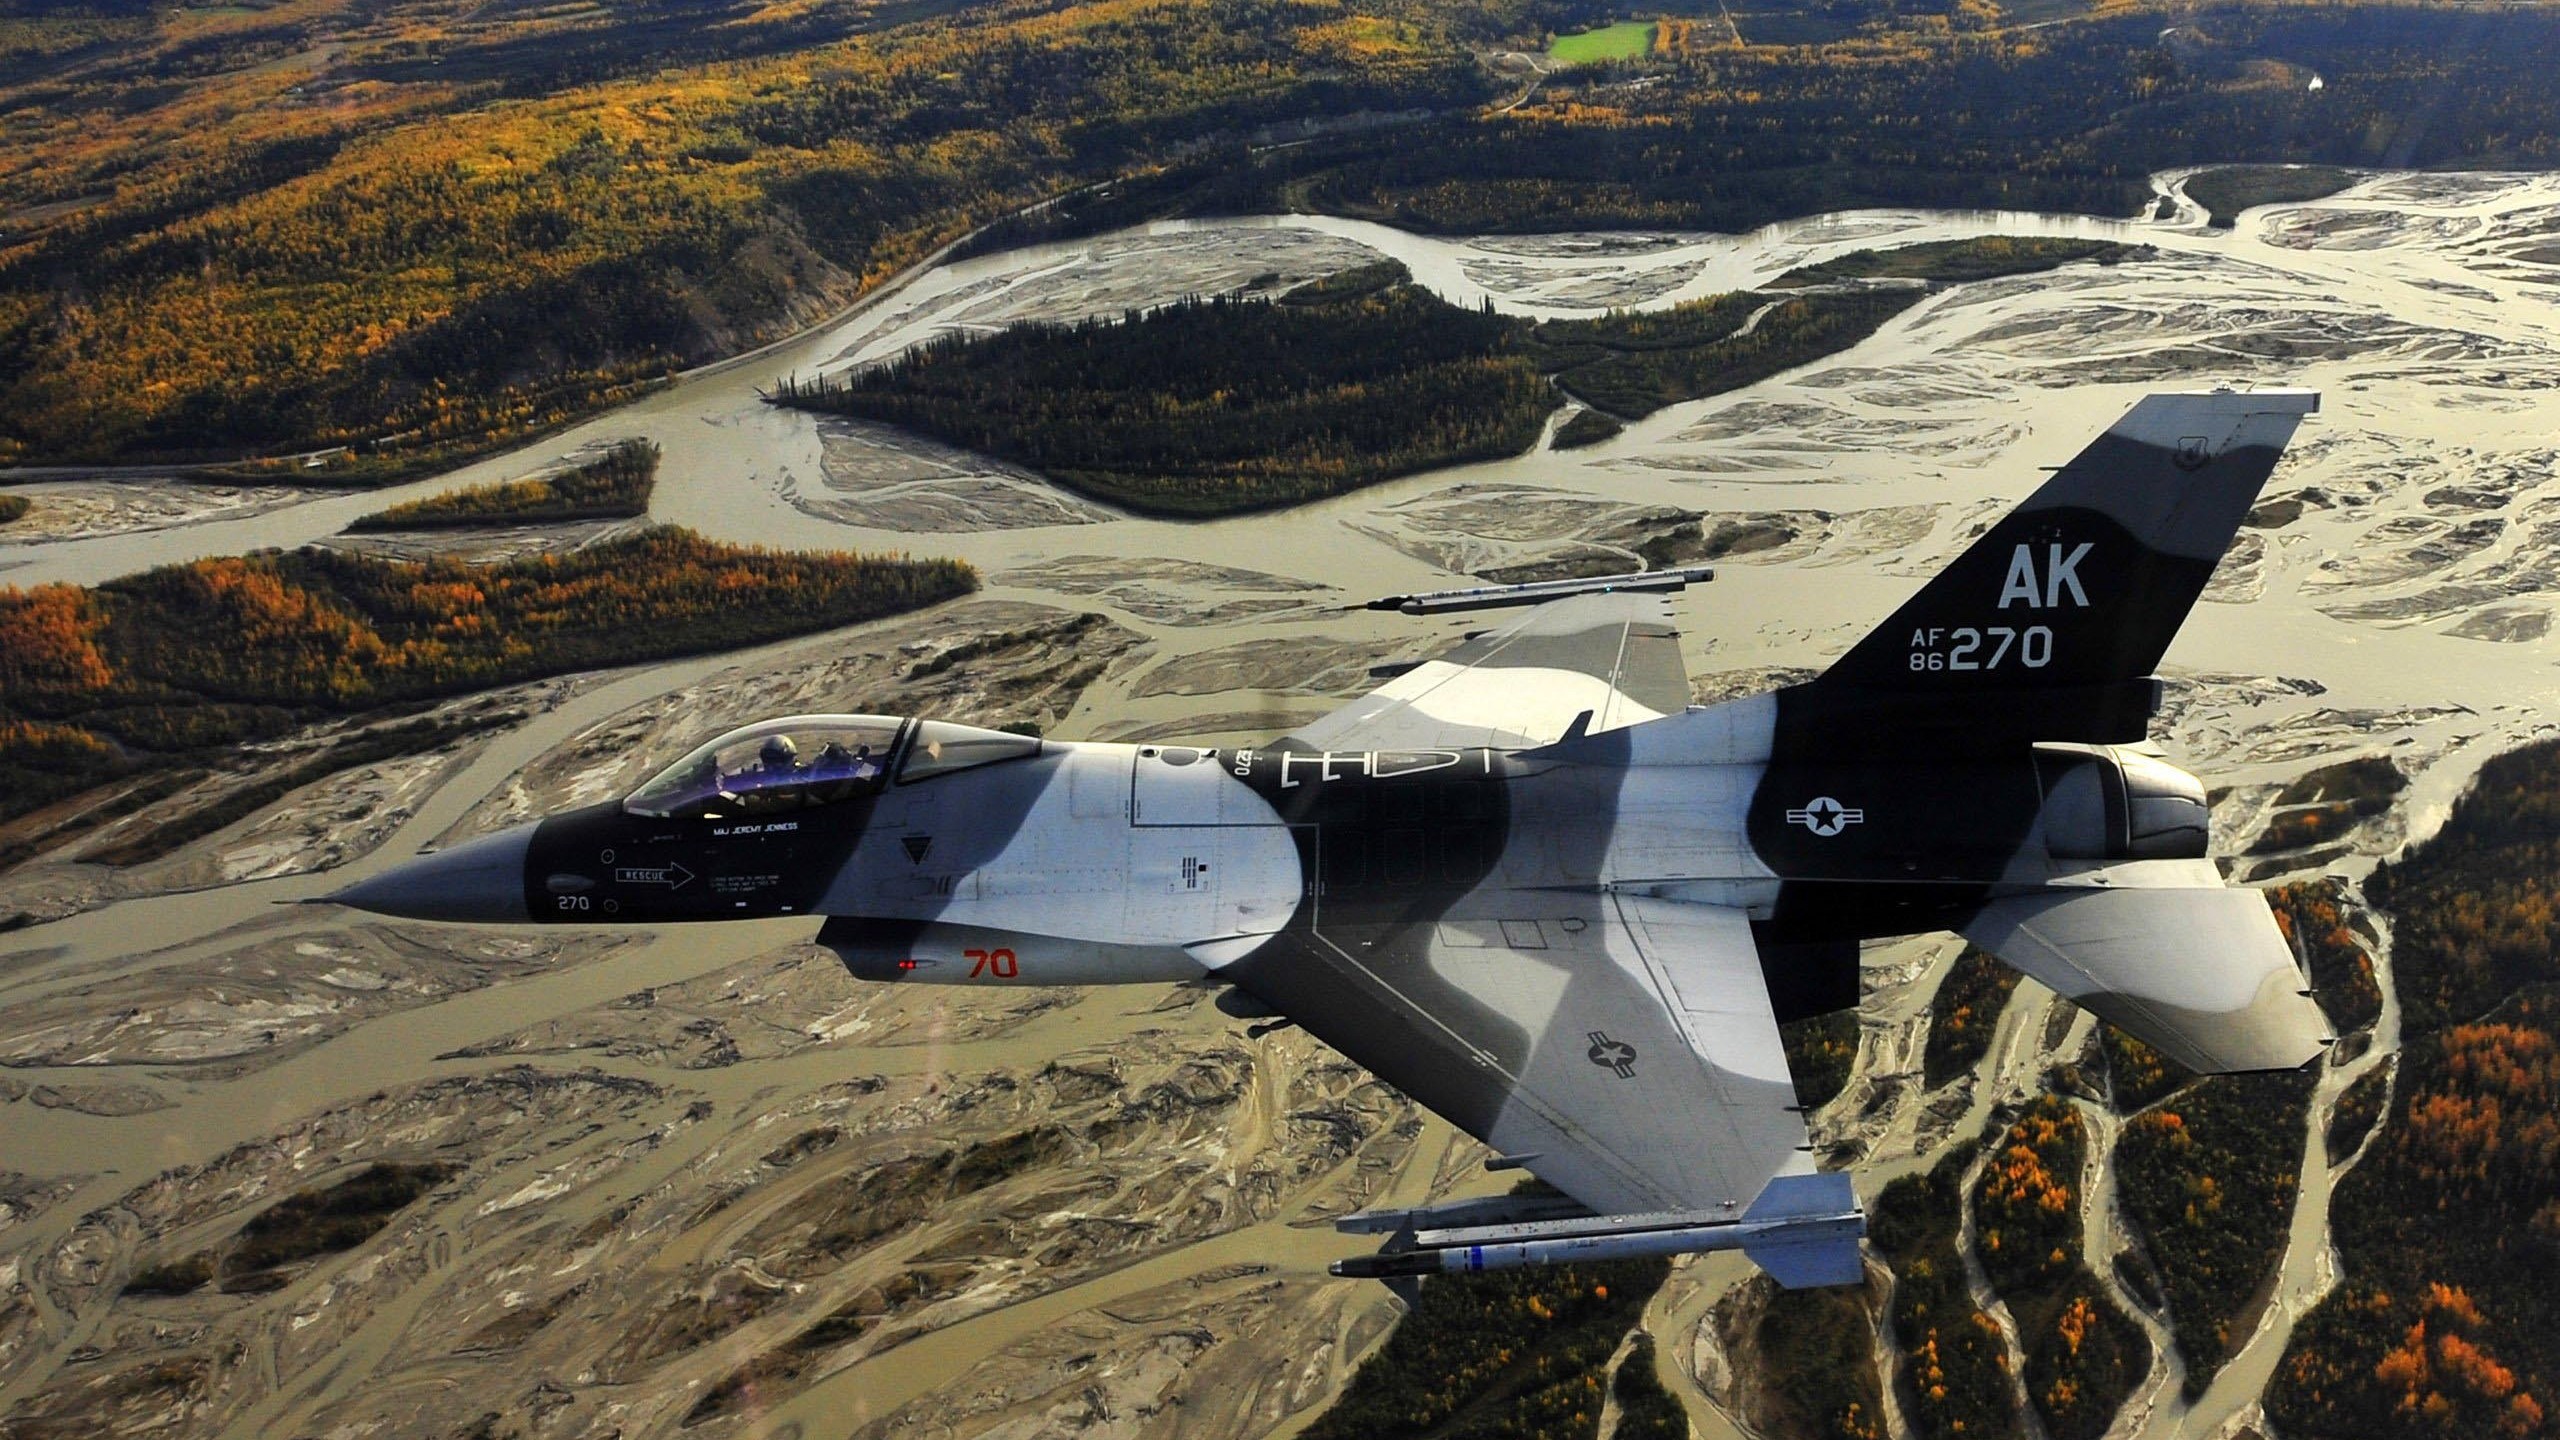 General 2560x1440 military aircraft military aircraft jet fighter General Dynamics F-16 Fighting Falcon US Air Force vehicle numbers military vehicle American aircraft river Alaska General Dynamics camouflage flying men missiles sky landscape